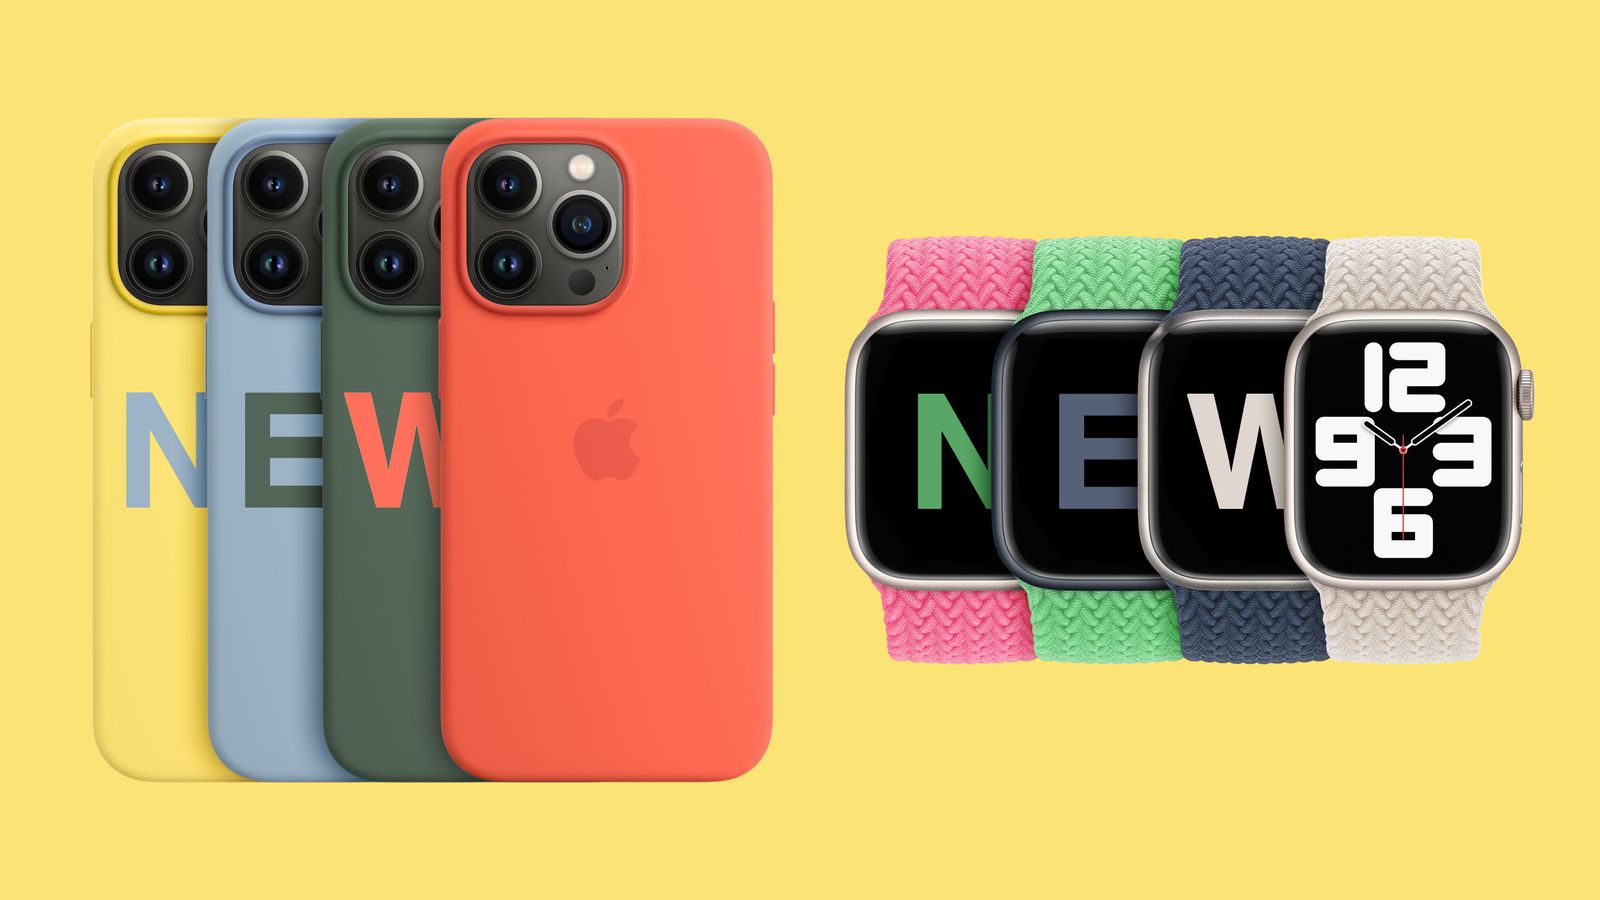 Apple Rolls Out New Spring Accessories Including Colorful iPhone Cases,  Apple Watch Bands, and AirTags Holders - MacRumors